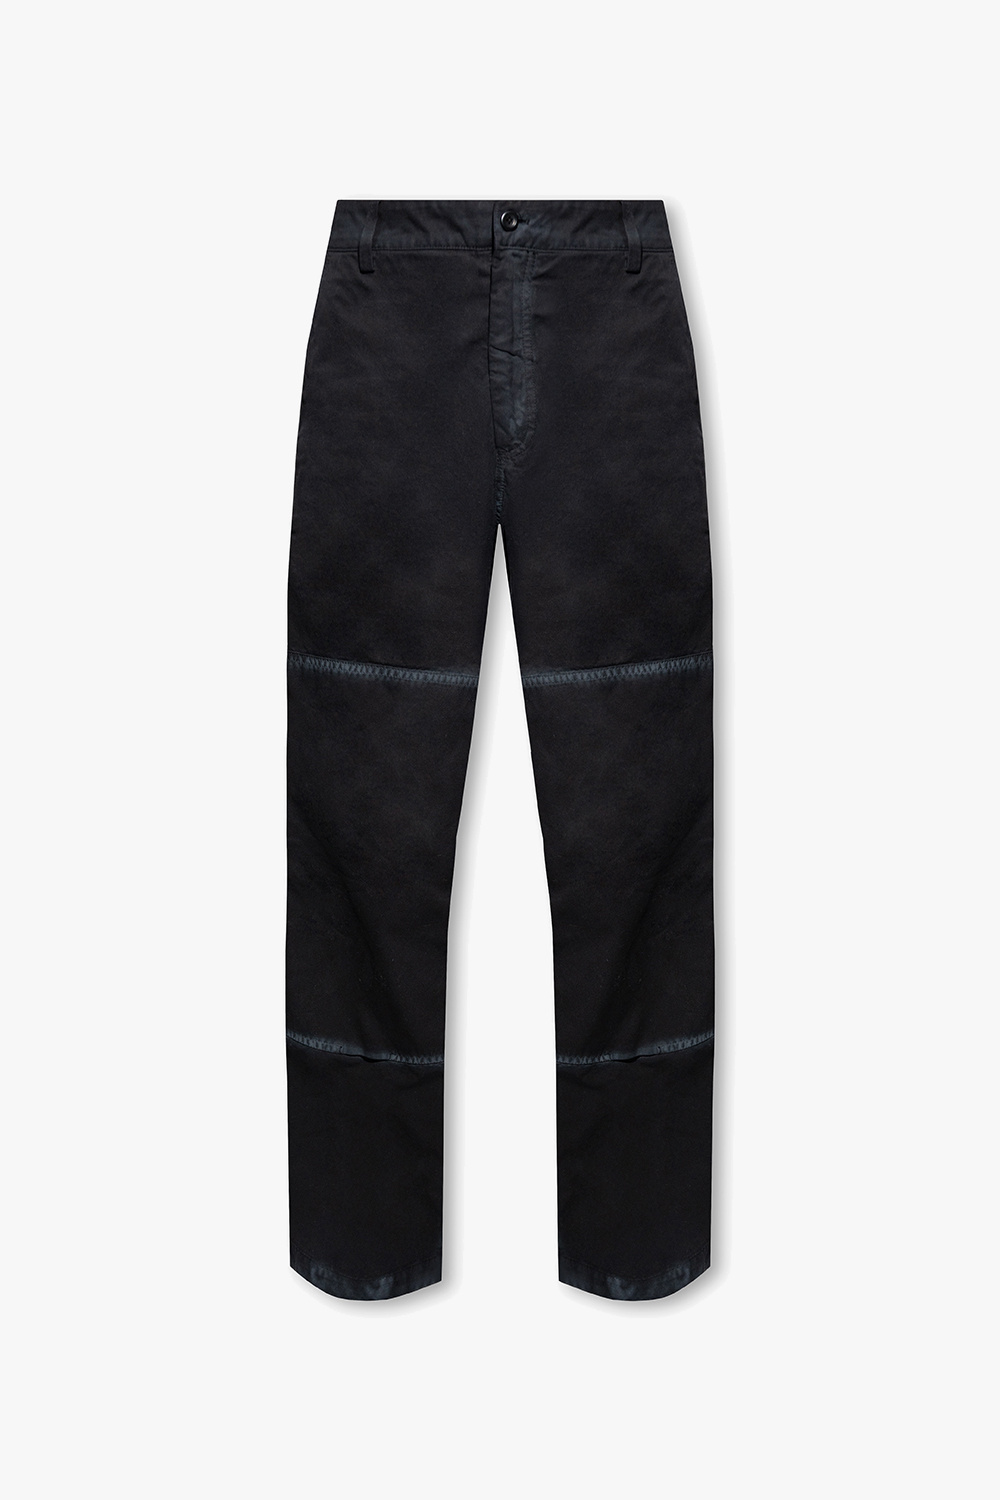 Norse Projects ‘Lukas’ trousers